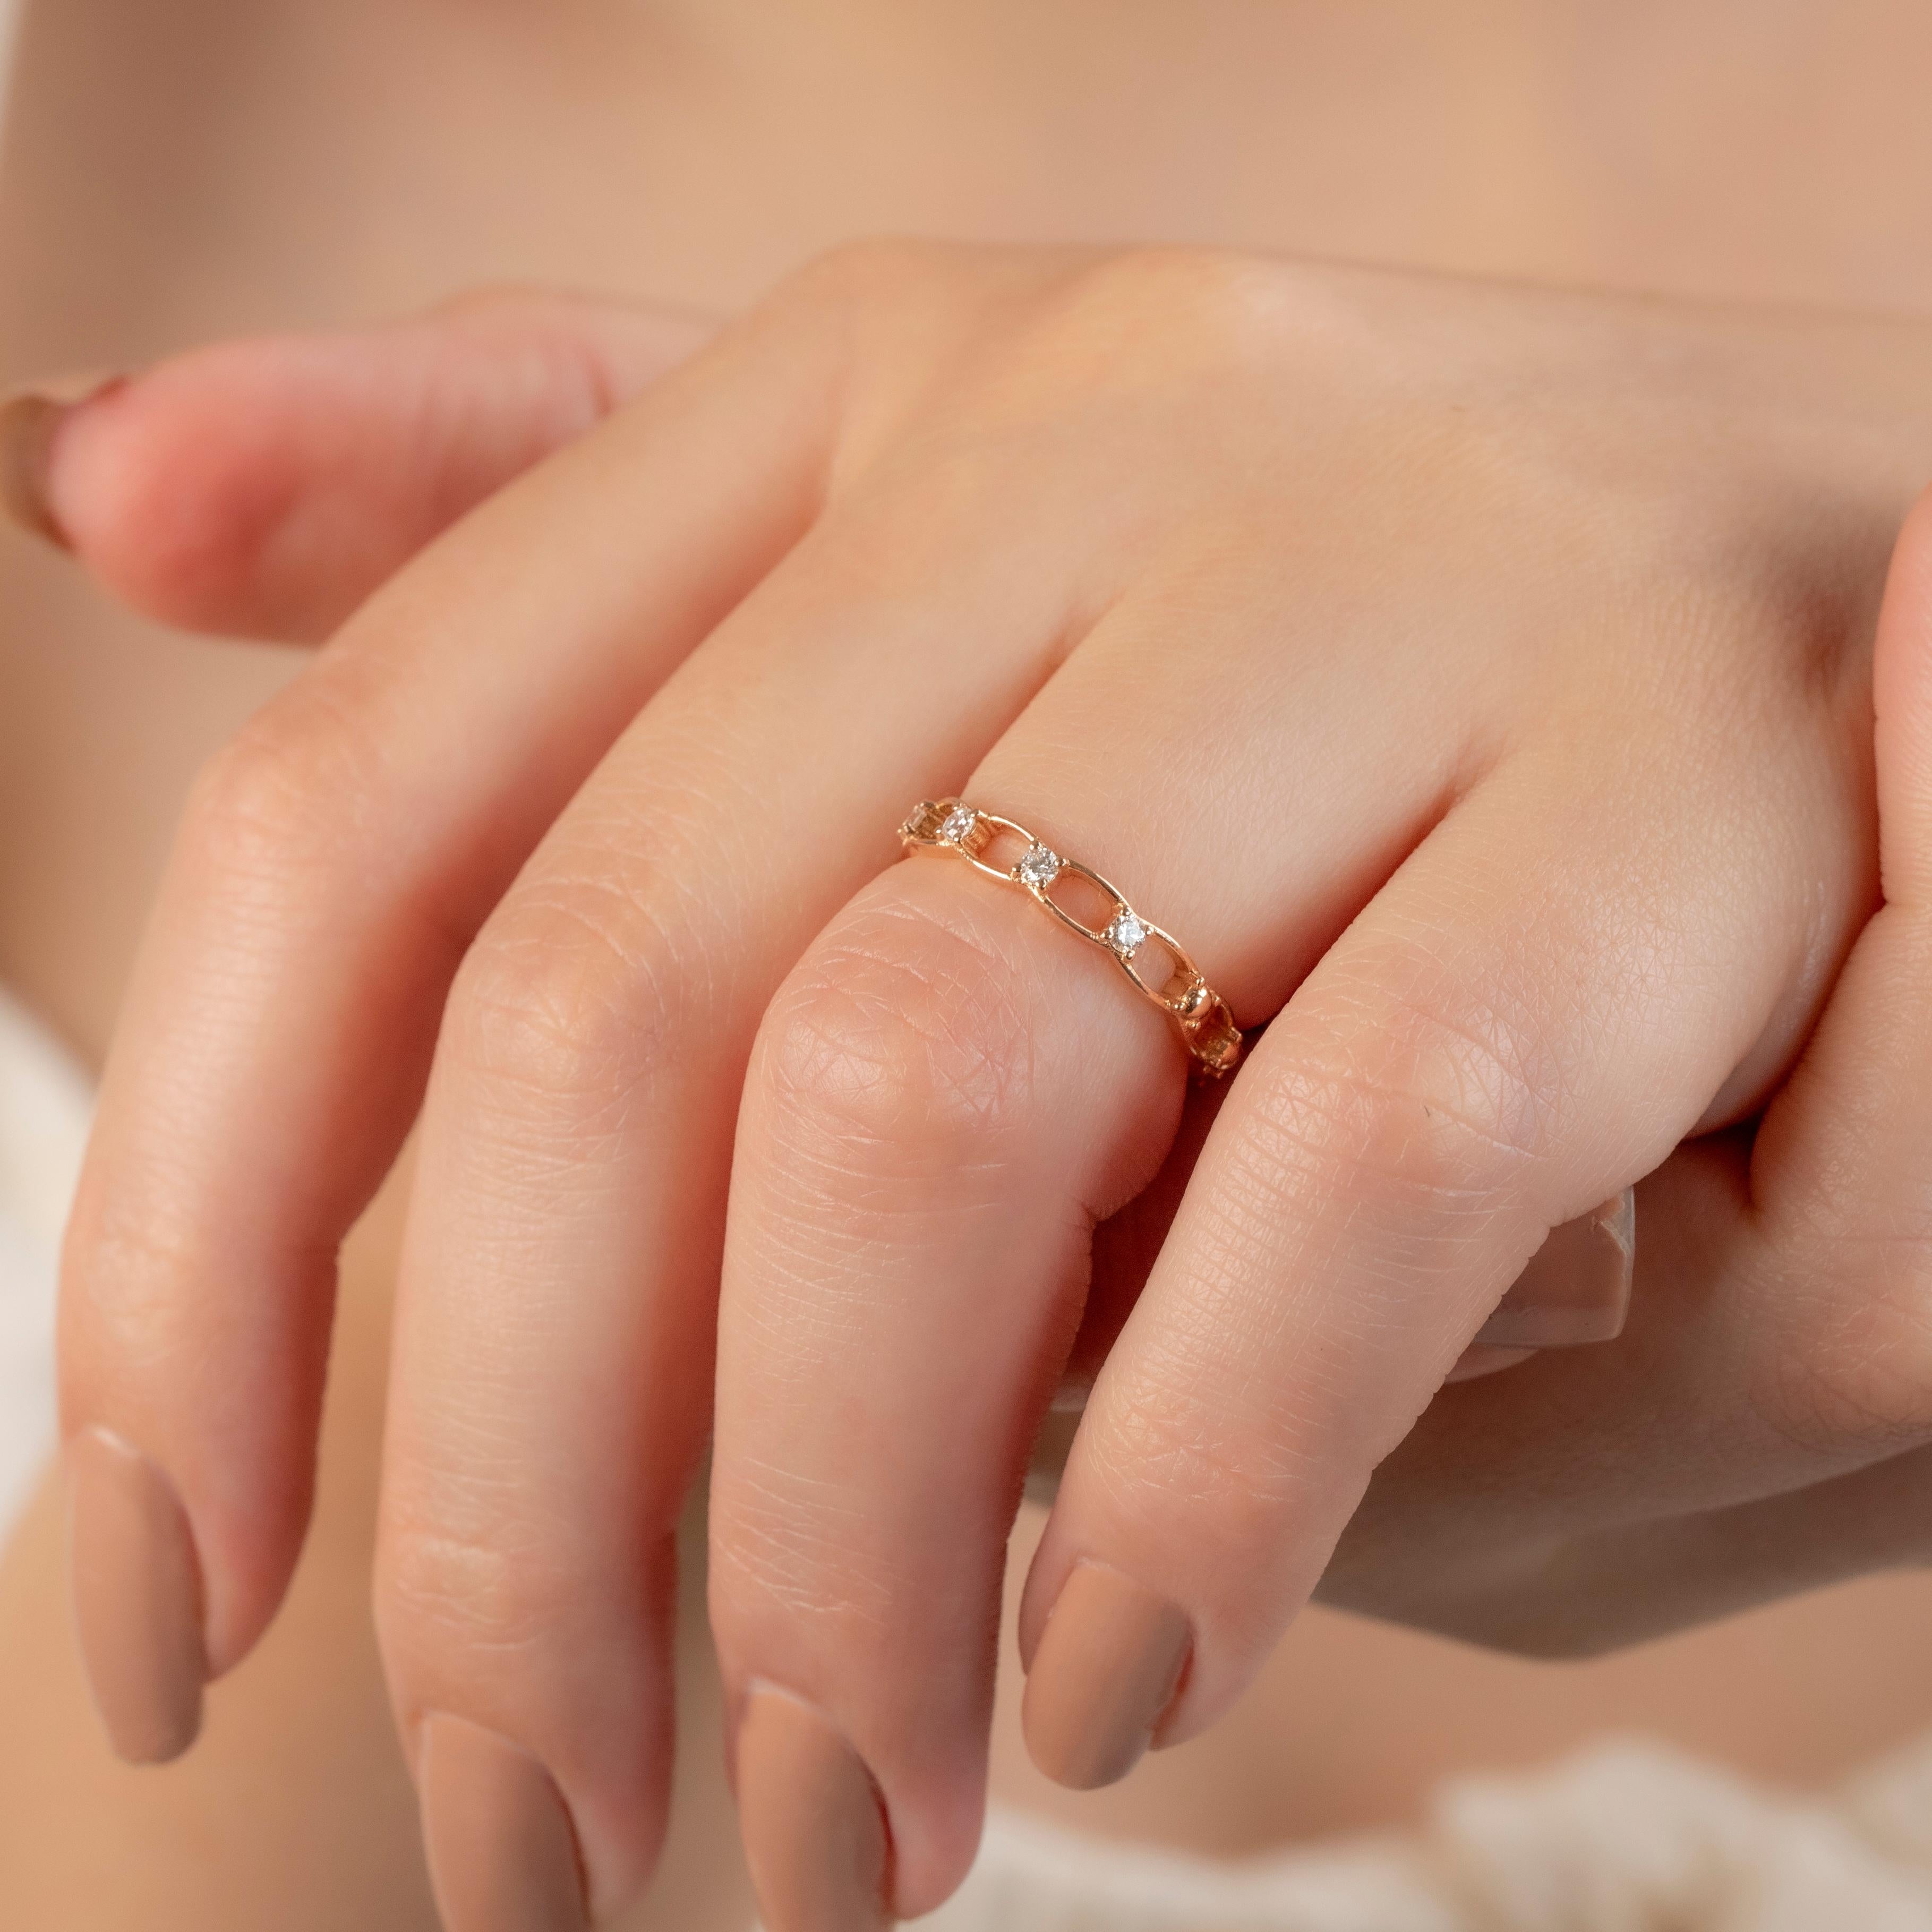 Round Diamond Trio Ring, 14k Solid Gold Ring, Dainty Ring, Minimalist Style Ring, İndex Finger Ring, Pinky Ring, Thumb Ring, Gift For Her created by hands from ring to the stone shapes. Good ideas of dainty ring or stackable ring gift for her.

This